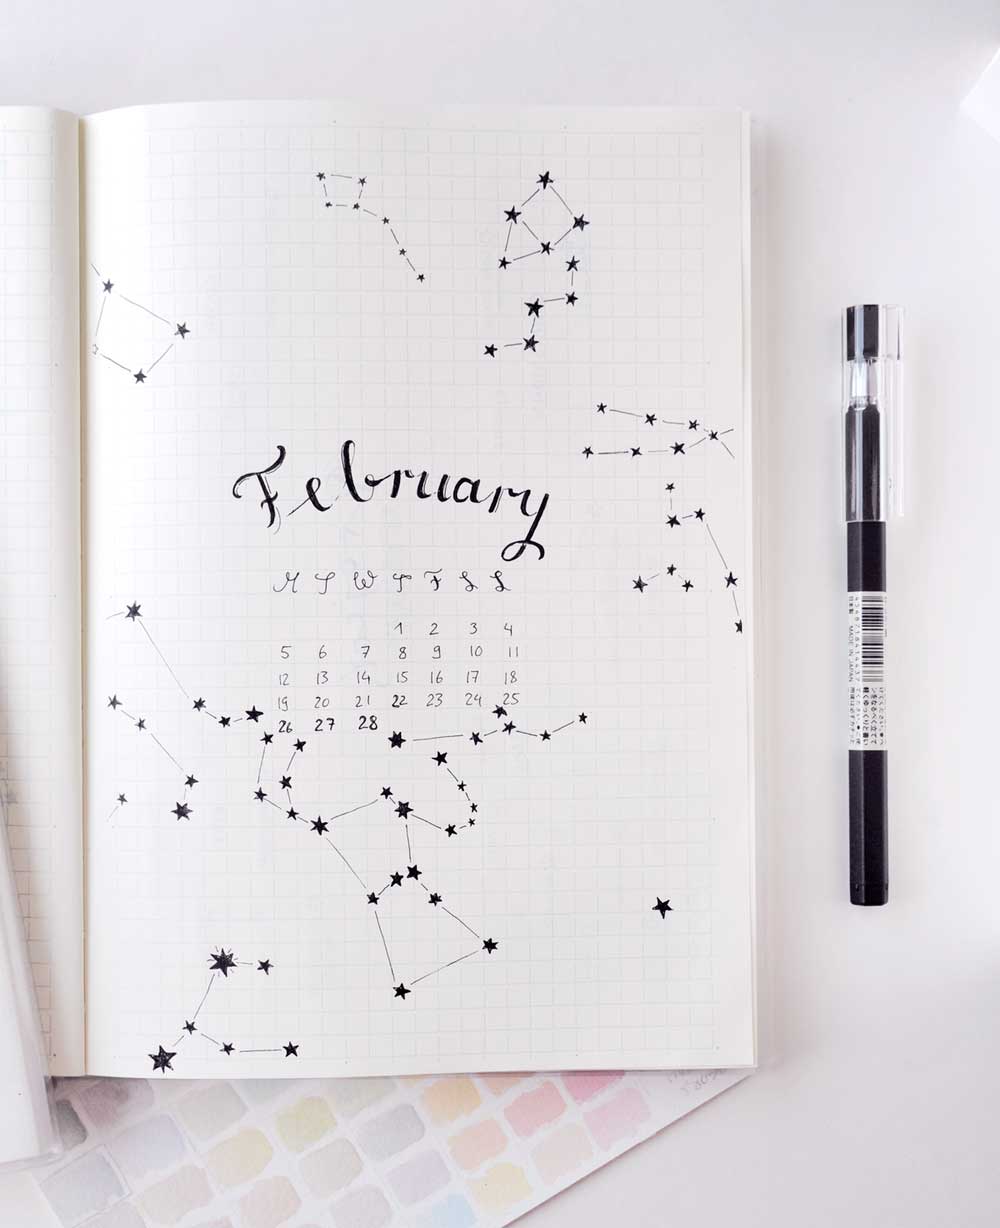 February Constellation Cover Page